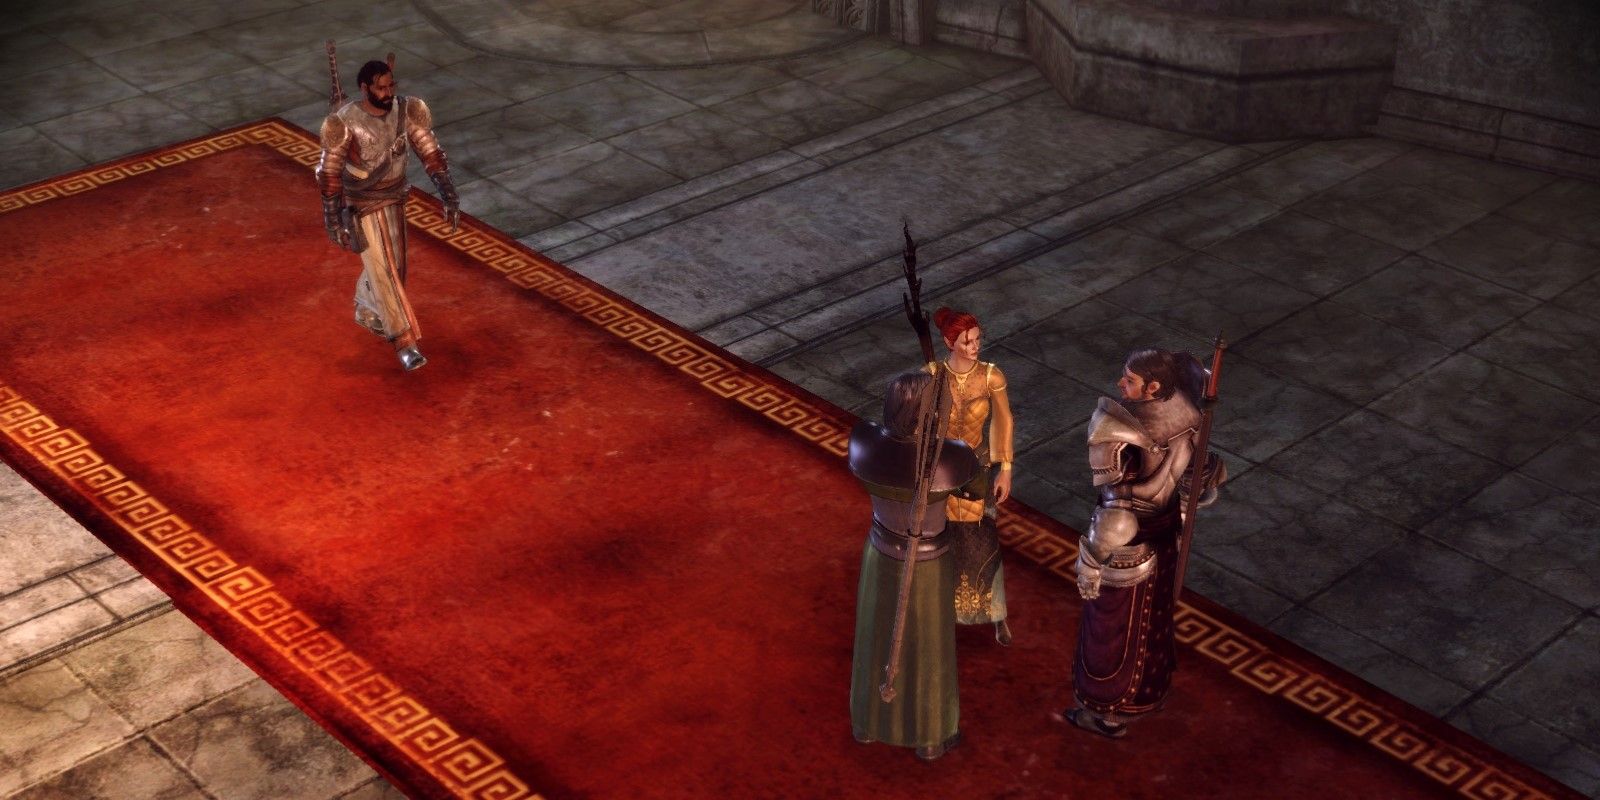 Duncan approaches Surana, Irving, and Greagoir in the Magi origin